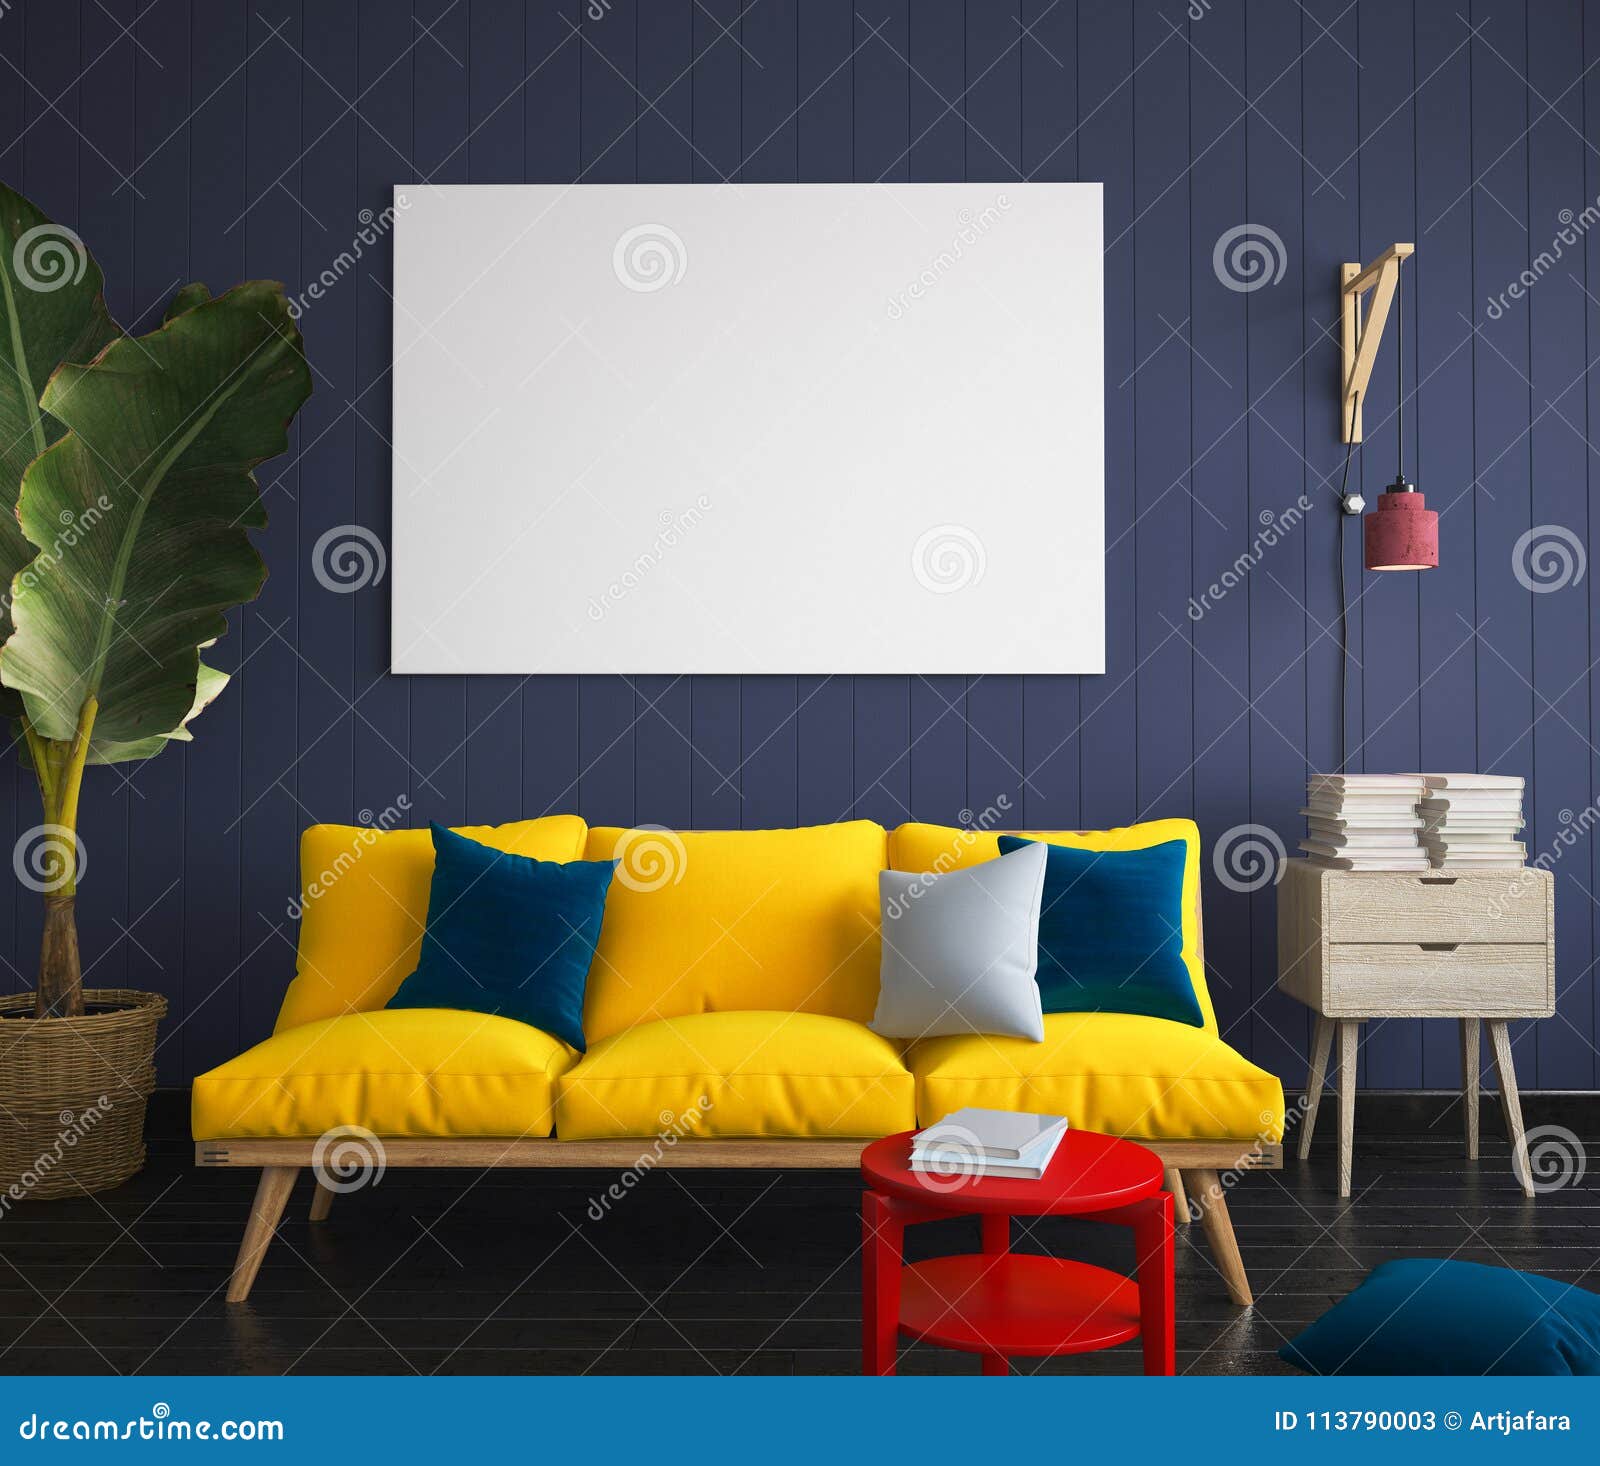 mock up poster in hipster interior with yellow sofa